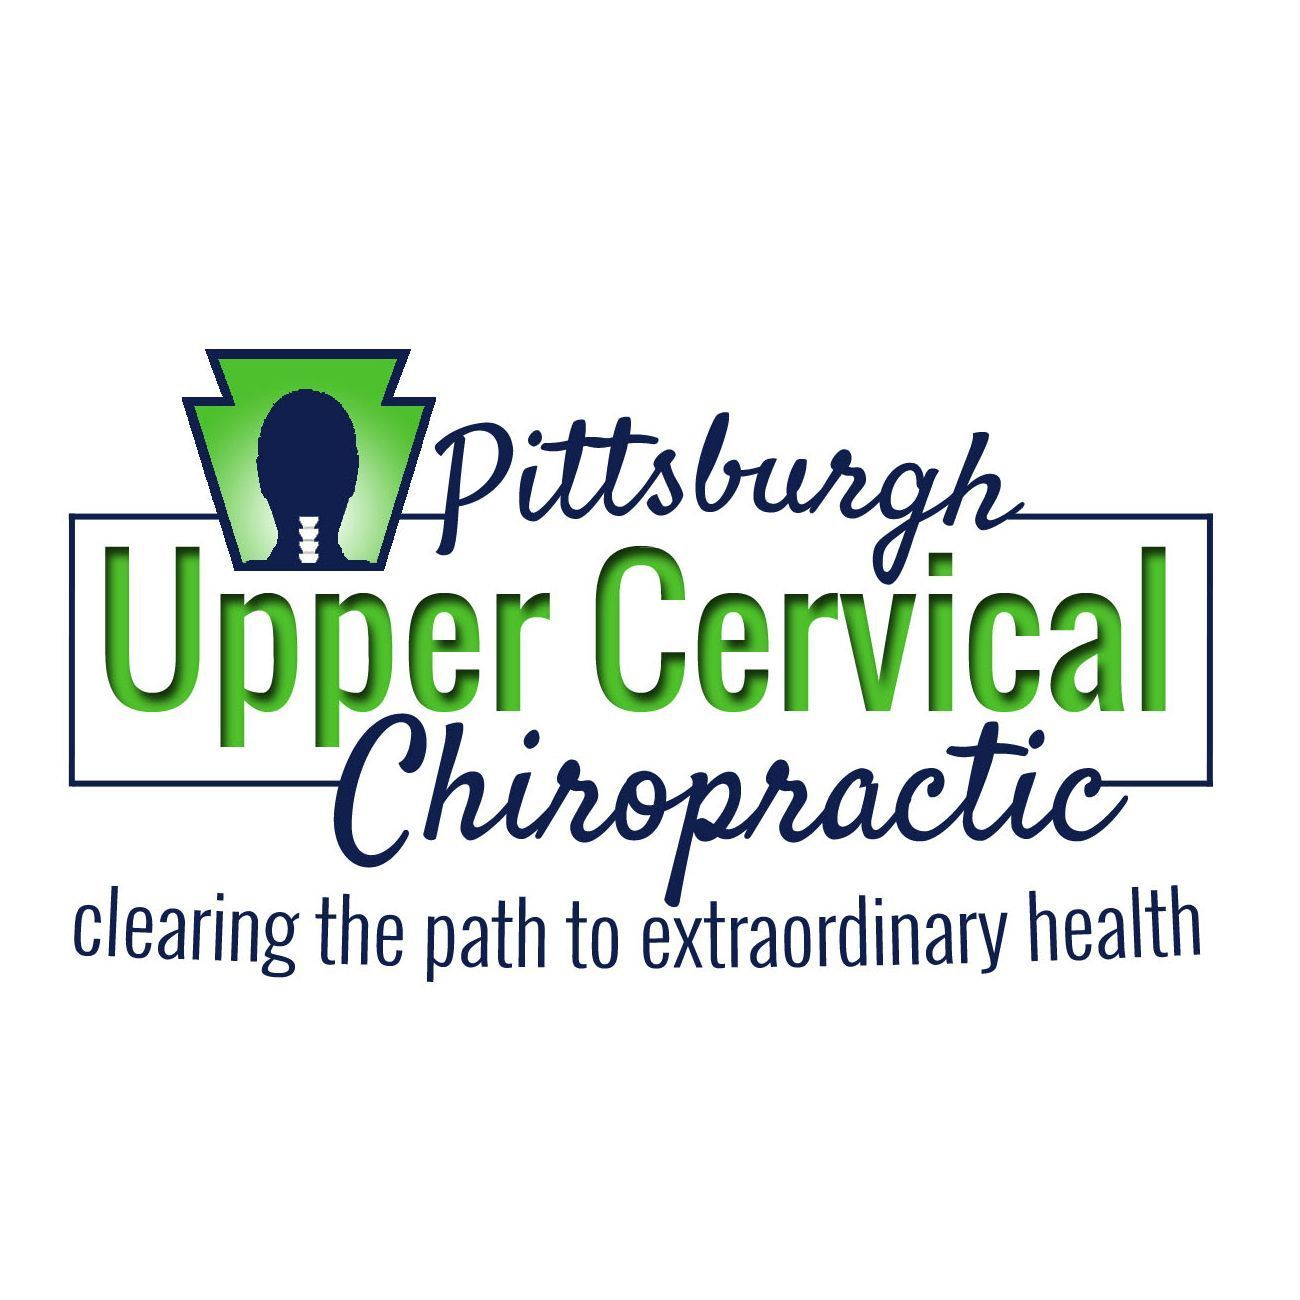 Pittsburgh Upper Cervical Chiropractic, 8110 Ohio River Blvd, Pittsburgh, 15202